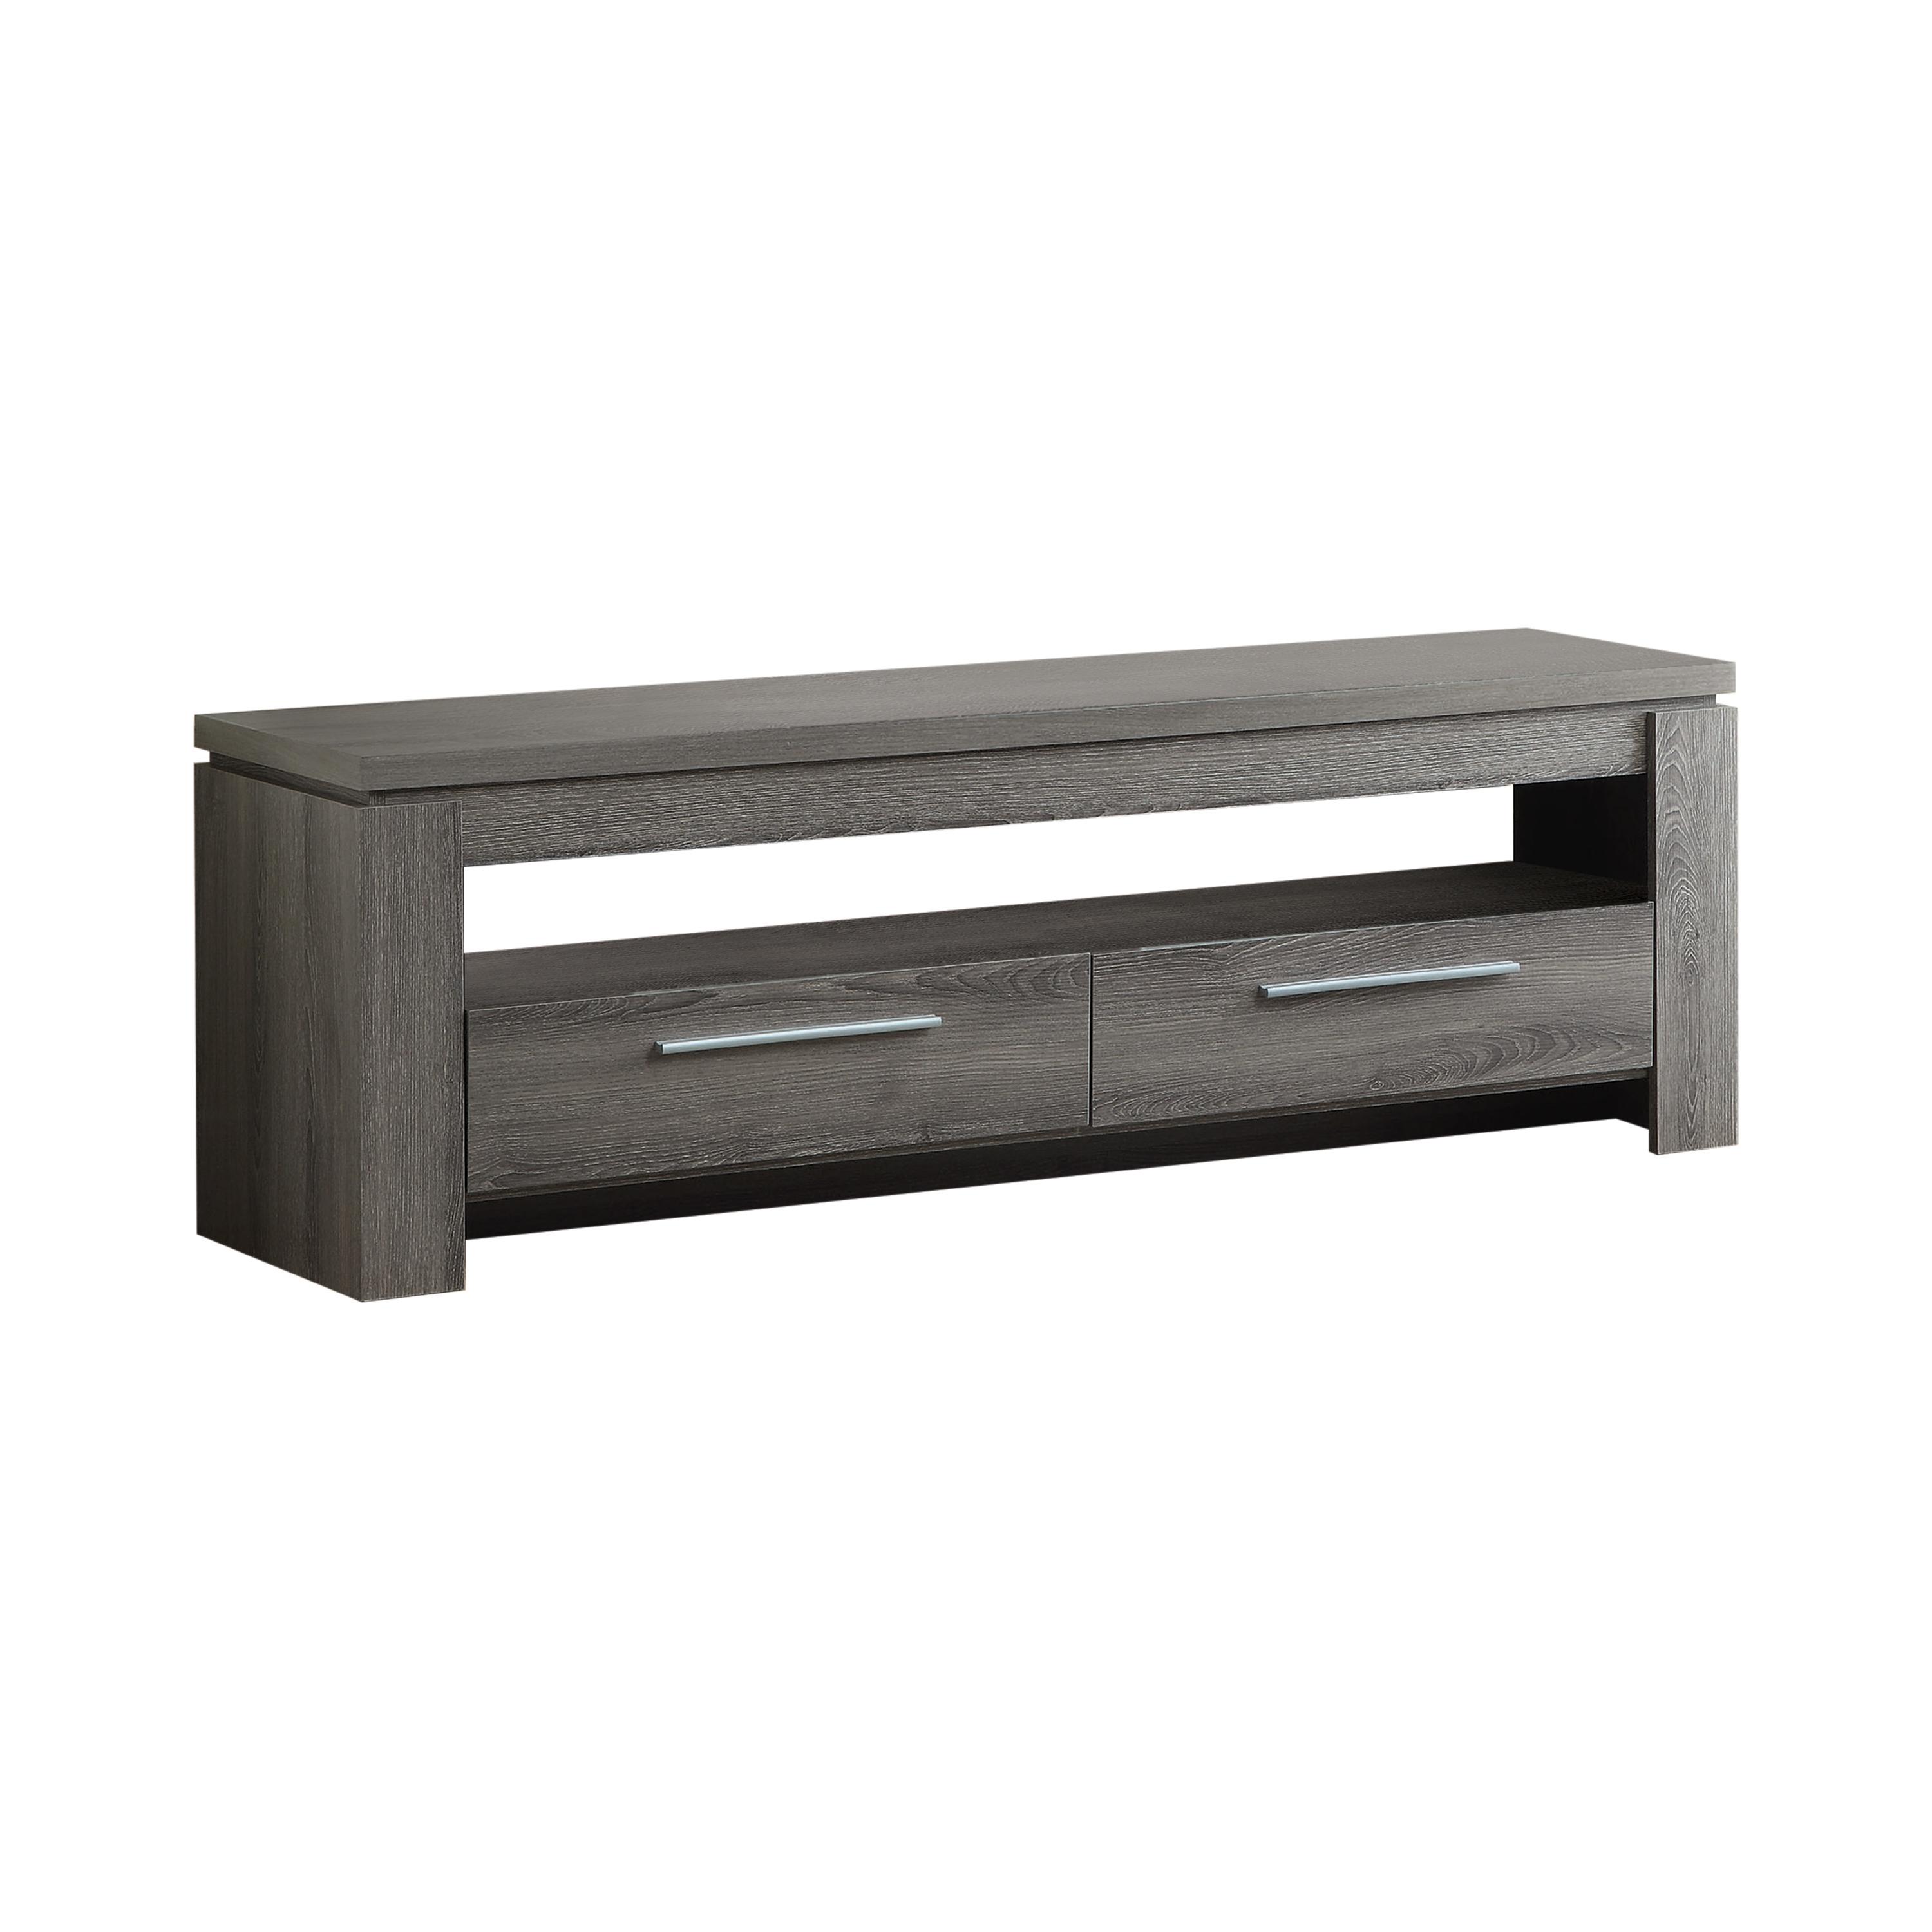 Modern Tv Console 701979 701979 in Gray 